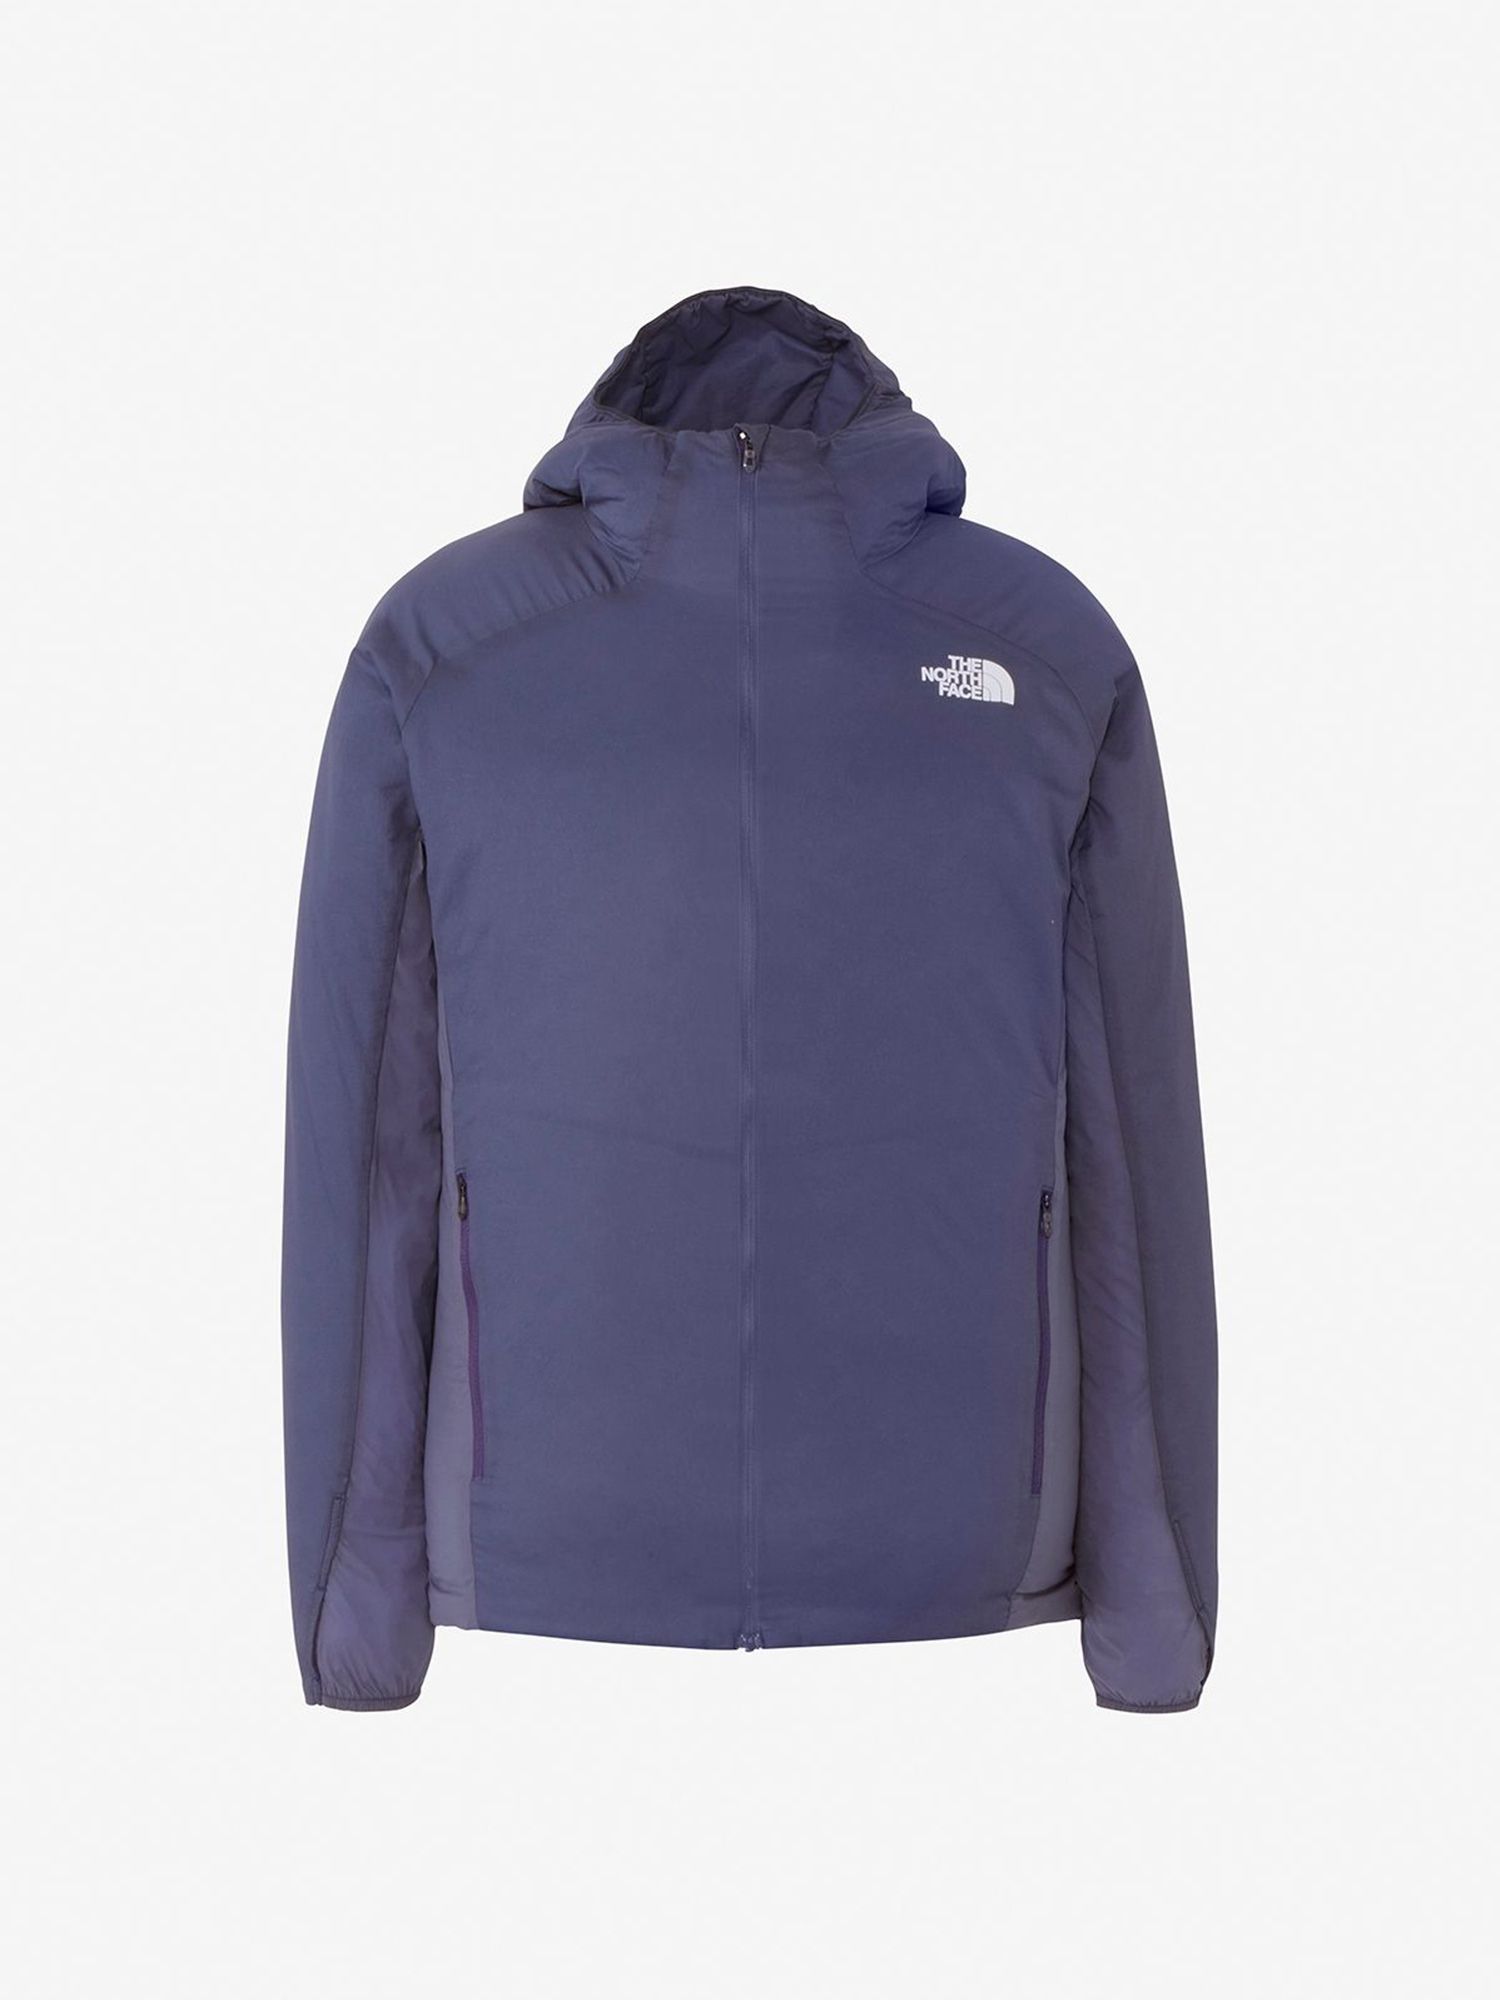 NY316 THE NORTH FACE WINDSTOPPER